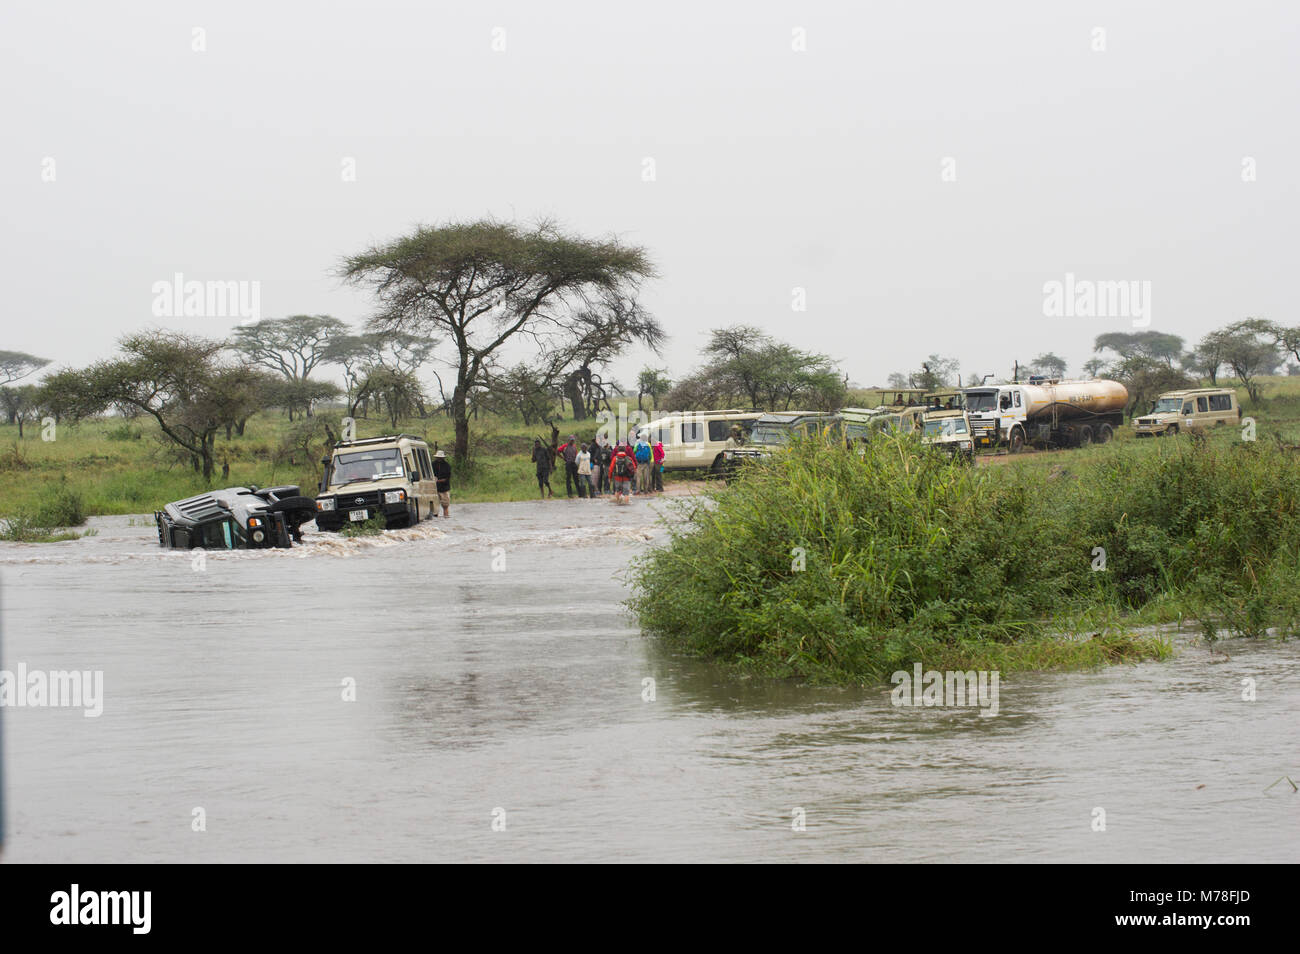 Dangerous washed out road in the Serengeti leads to one overturned SUV and one stuck, the windows had to be broken to allow tourists to climb out Stock Photo